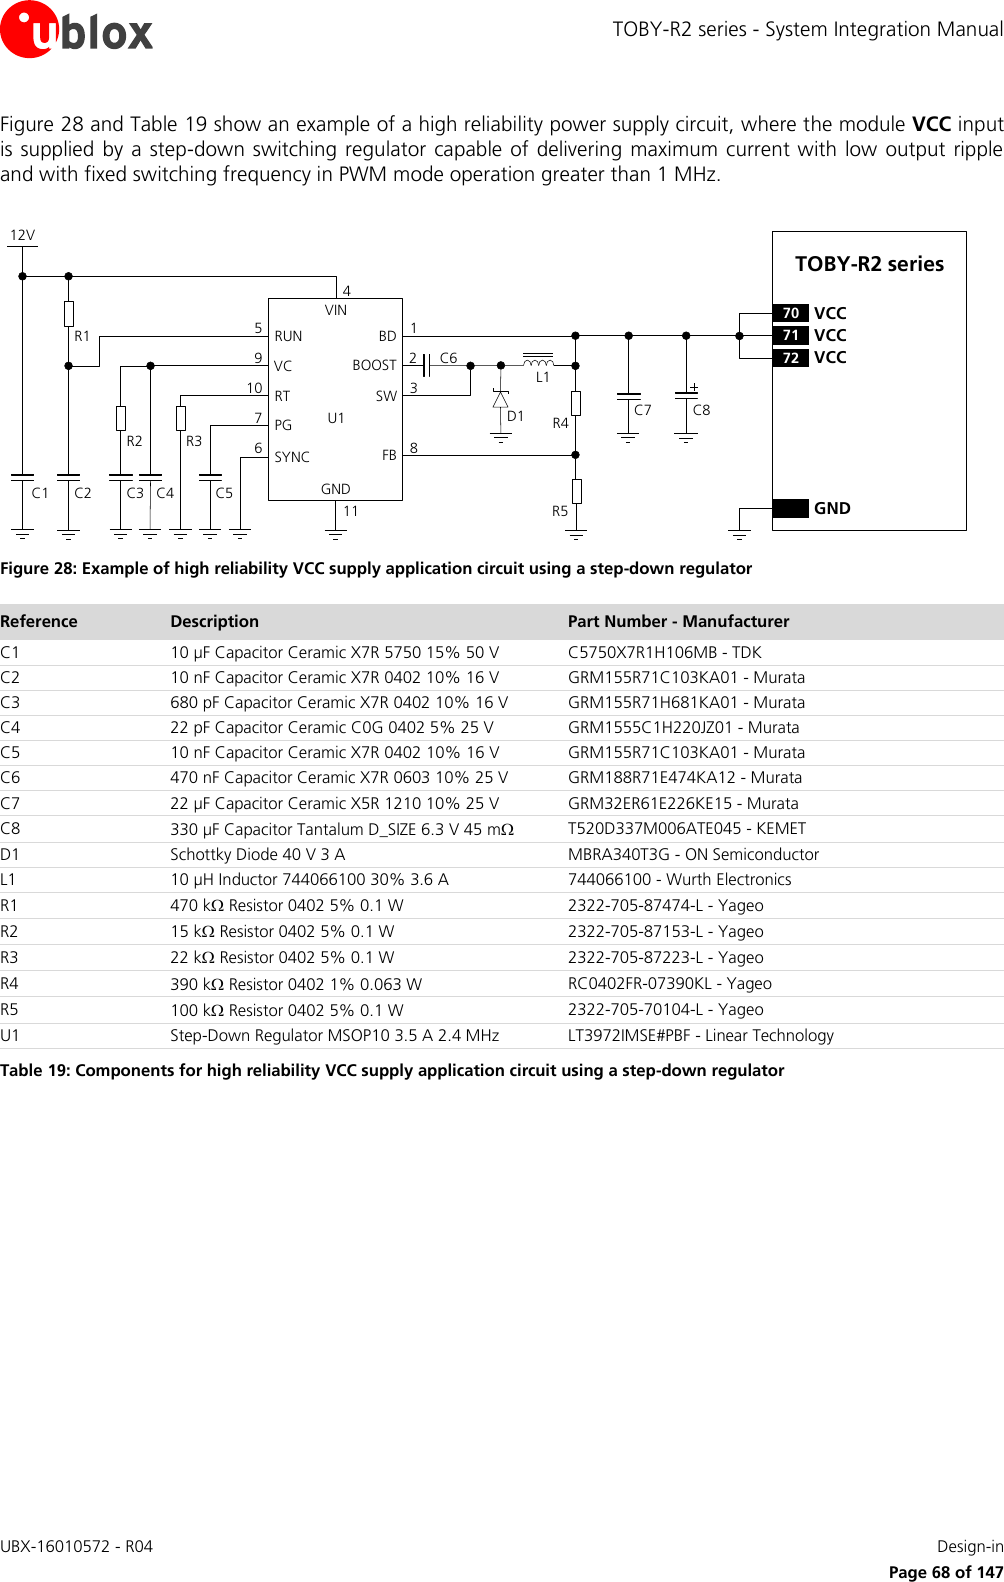 TOBY-R2 series - System Integration Manual UBX-16010572 - R04    Design-in     Page 68 of 147 Figure 28 and Table 19 show an example of a high reliability power supply circuit, where the module VCC input is supplied by a step-down switching regulator capable of delivering  maximum current with  low output ripple and with fixed switching frequency in PWM mode operation greater than 1 MHz.  12VC5R3C4R2C2C1R1VINRUNVCRTPGSYNCBDBOOSTSWFBGND671095C61238114C7 C8D1 R4R5L1C3U1TOBY-R2 series71 VCC72 VCC70 VCCGND Figure 28: Example of high reliability VCC supply application circuit using a step-down regulator Reference Description Part Number - Manufacturer C1 10 µF Capacitor Ceramic X7R 5750 15% 50 V C5750X7R1H106MB - TDK C2 10 nF Capacitor Ceramic X7R 0402 10% 16 V GRM155R71C103KA01 - Murata C3 680 pF Capacitor Ceramic X7R 0402 10% 16 V GRM155R71H681KA01 - Murata C4 22 pF Capacitor Ceramic C0G 0402 5% 25 V GRM1555C1H220JZ01 - Murata C5 10 nF Capacitor Ceramic X7R 0402 10% 16 V GRM155R71C103KA01 - Murata C6 470 nF Capacitor Ceramic X7R 0603 10% 25 V GRM188R71E474KA12 - Murata C7 22 µF Capacitor Ceramic X5R 1210 10% 25 V GRM32ER61E226KE15 - Murata C8 330 µF Capacitor Tantalum D_SIZE 6.3 V 45 m T520D337M006ATE045 - KEMET D1 Schottky Diode 40 V 3 A MBRA340T3G - ON Semiconductor L1 10 µH Inductor 744066100 30% 3.6 A 744066100 - Wurth Electronics R1 470 k Resistor 0402 5% 0.1 W 2322-705-87474-L - Yageo R2 15 k Resistor 0402 5% 0.1 W 2322-705-87153-L - Yageo R3 22 k Resistor 0402 5% 0.1 W 2322-705-87223-L - Yageo R4 390 k Resistor 0402 1% 0.063 W RC0402FR-07390KL - Yageo R5 100 k Resistor 0402 5% 0.1 W 2322-705-70104-L - Yageo U1 Step-Down Regulator MSOP10 3.5 A 2.4 MHz LT3972IMSE#PBF - Linear Technology Table 19: Components for high reliability VCC supply application circuit using a step-down regulator 